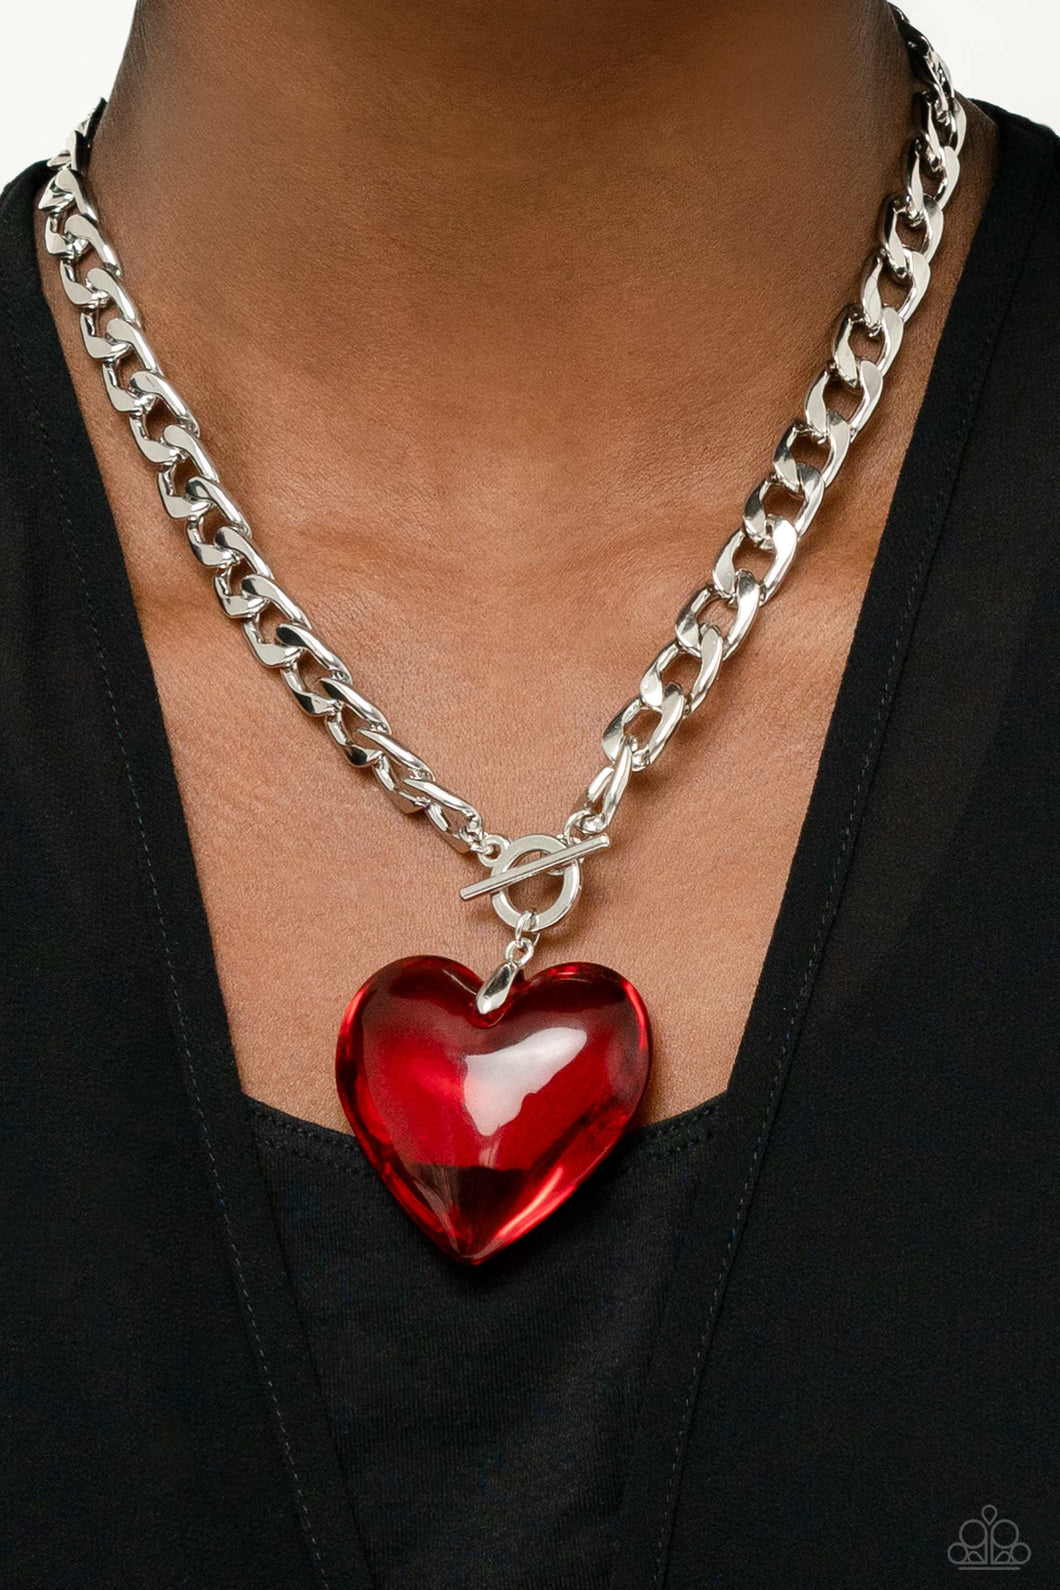 Paparazzi GLASSY-Hero Red Heart $5 Necklace. Subscribe & Save. #P2ST-RDXX-120XX. LOP Necklace